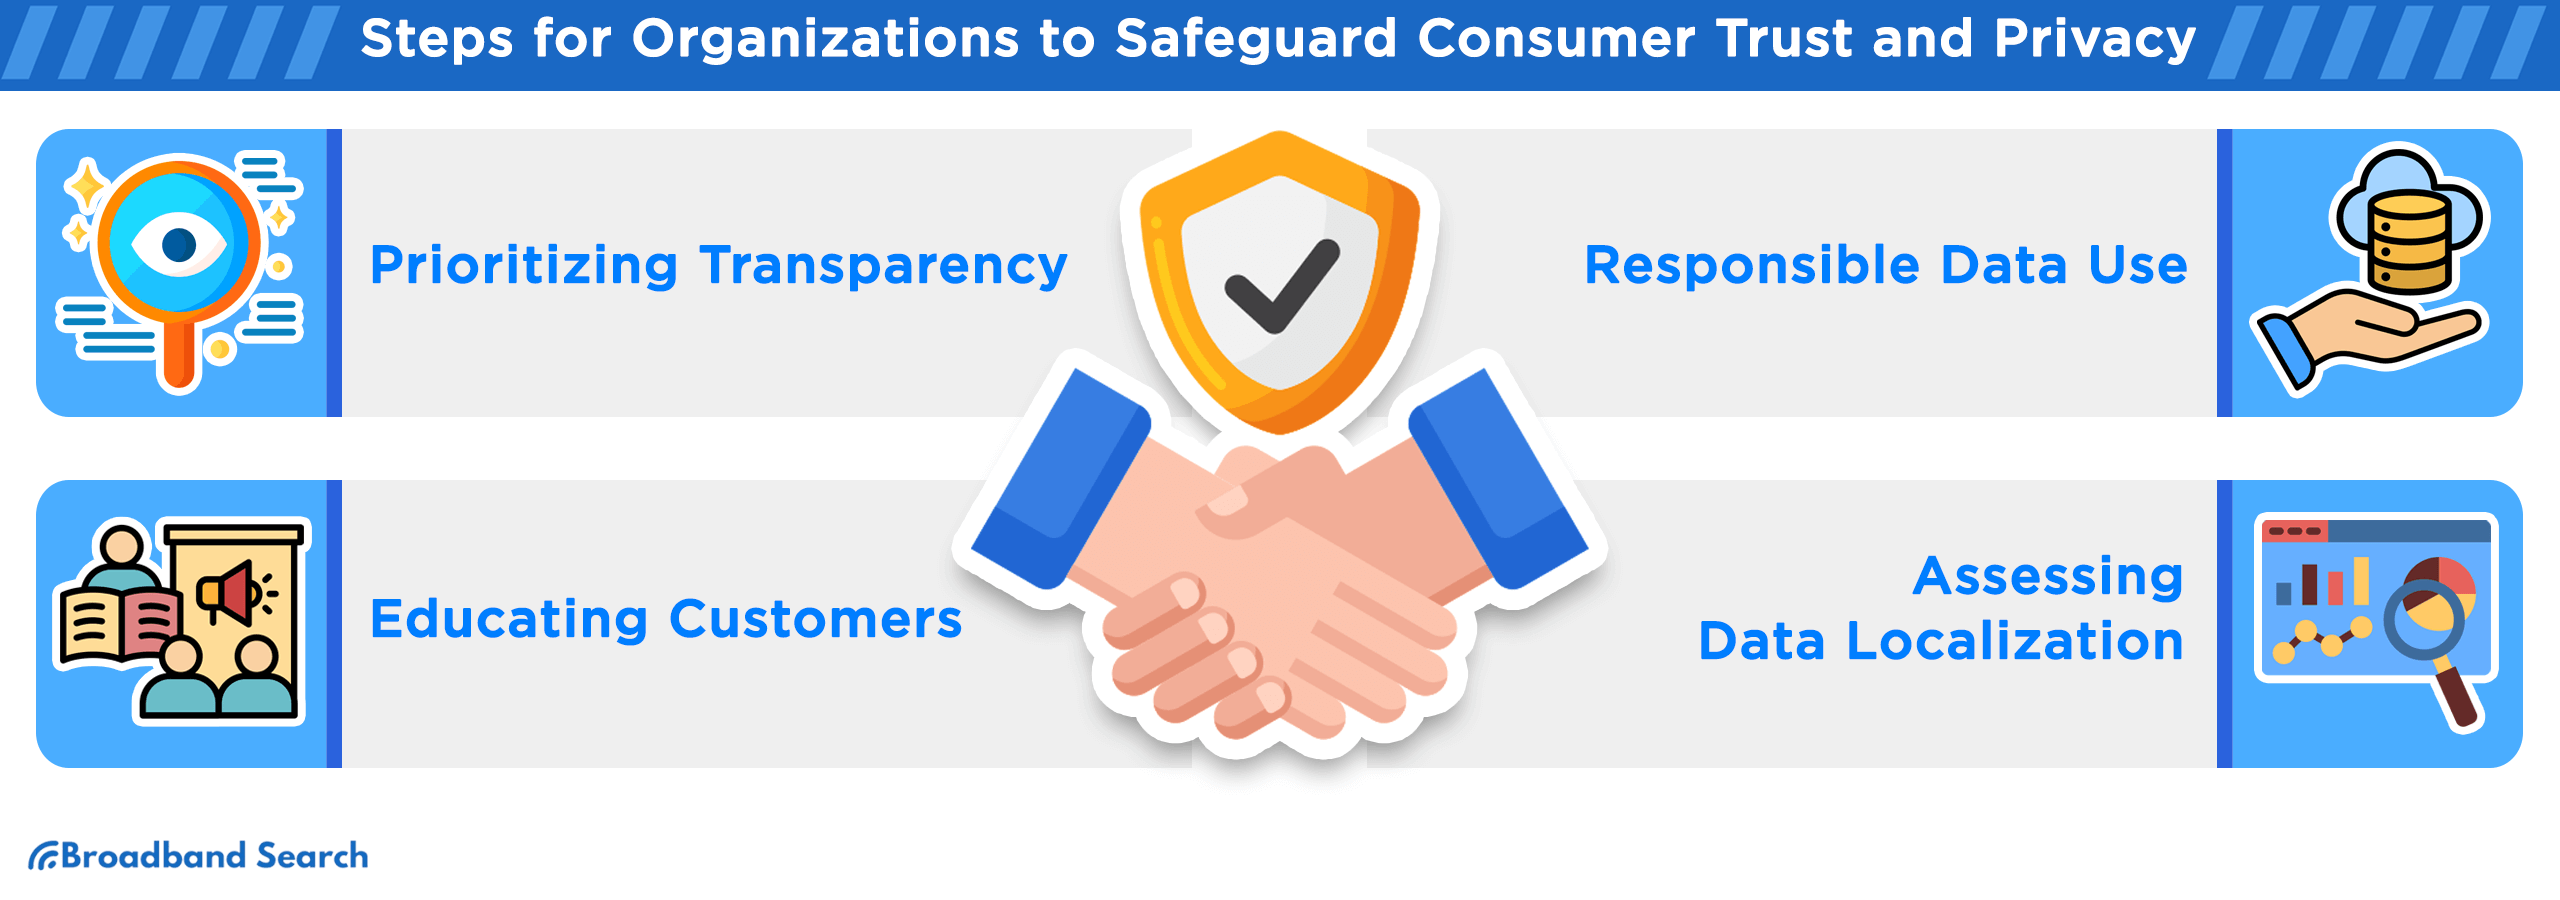 four steps for organizations to safeguard consumer trust and privacy